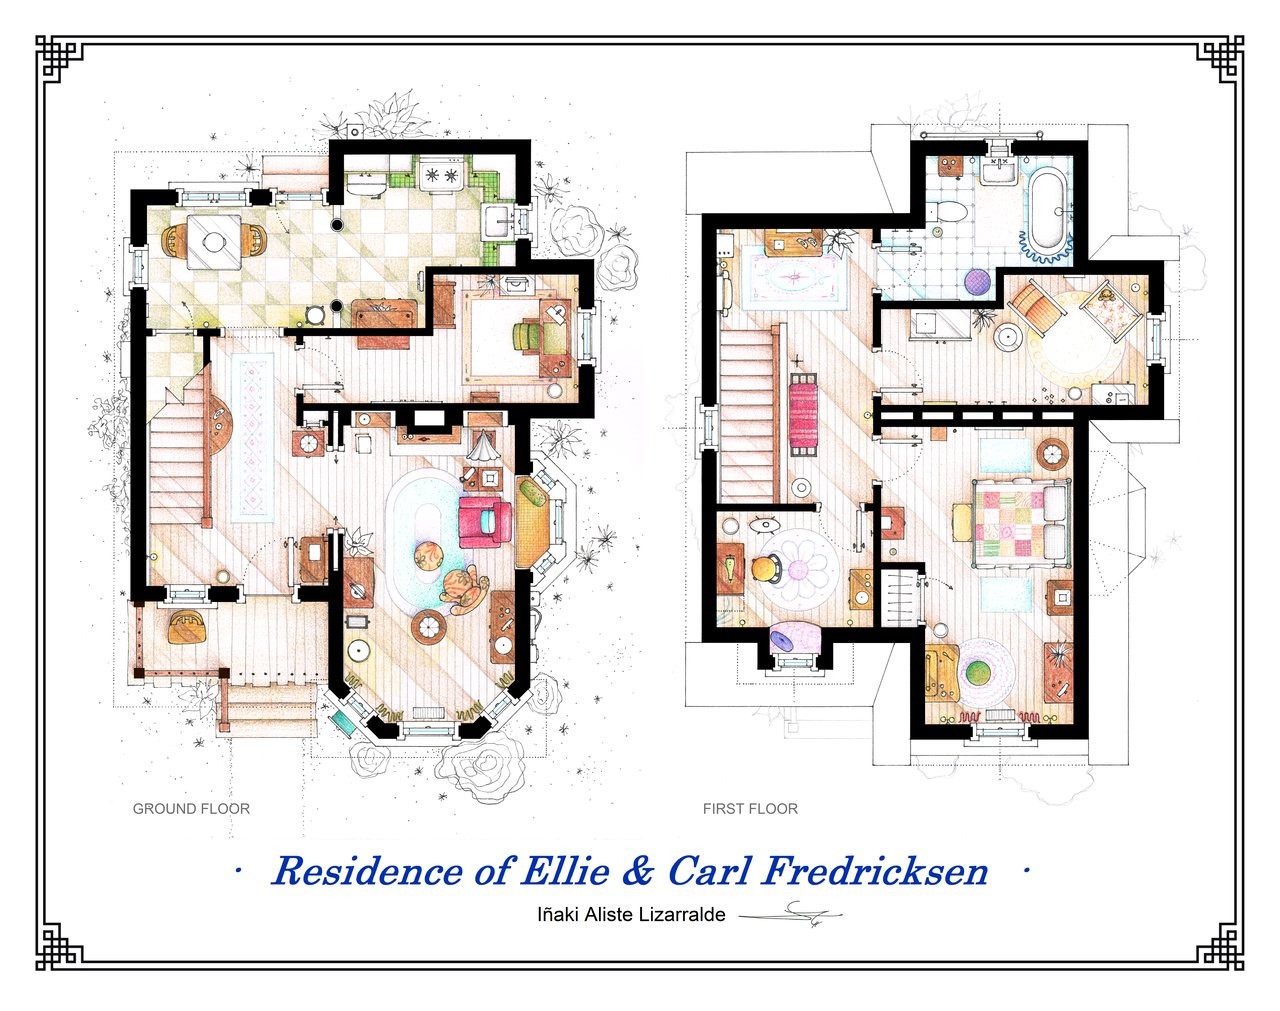 floorplans_of_the_house_from_up_by_nikneuk-d5sg4kb.jpg